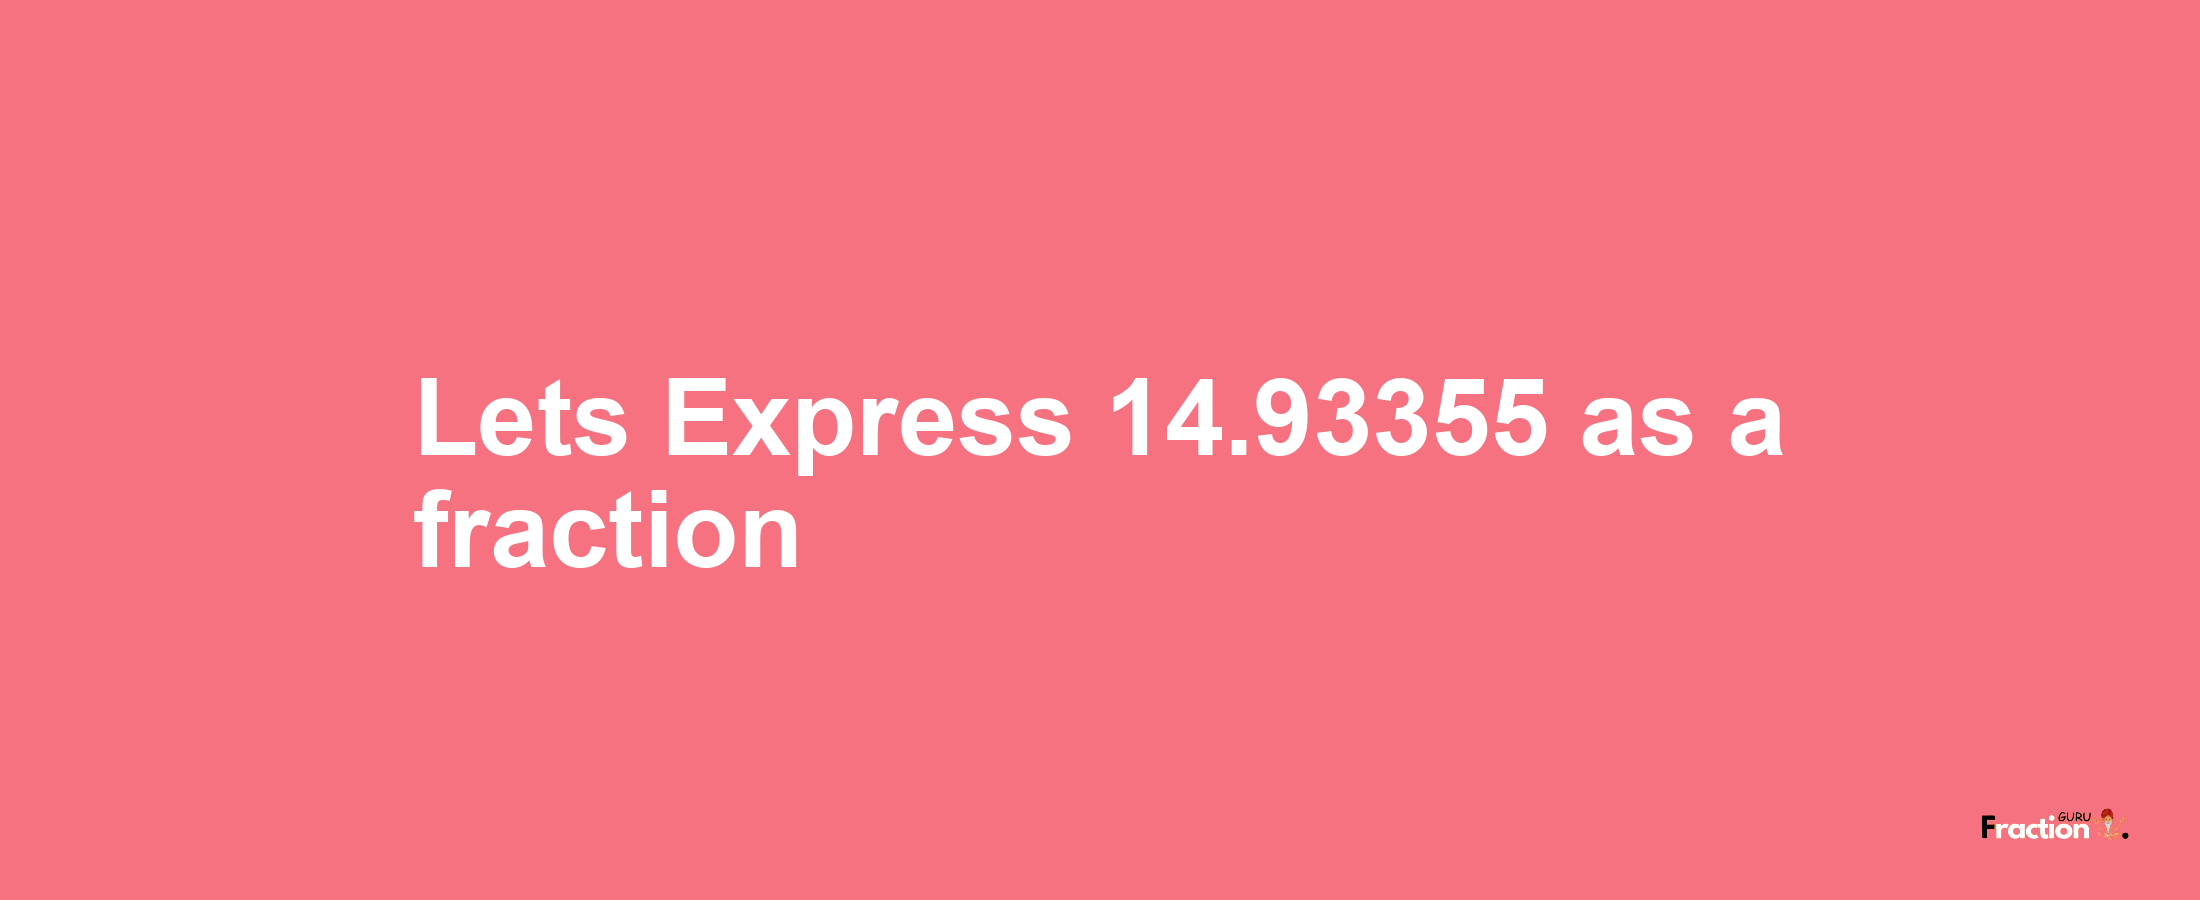 Lets Express 14.93355 as afraction